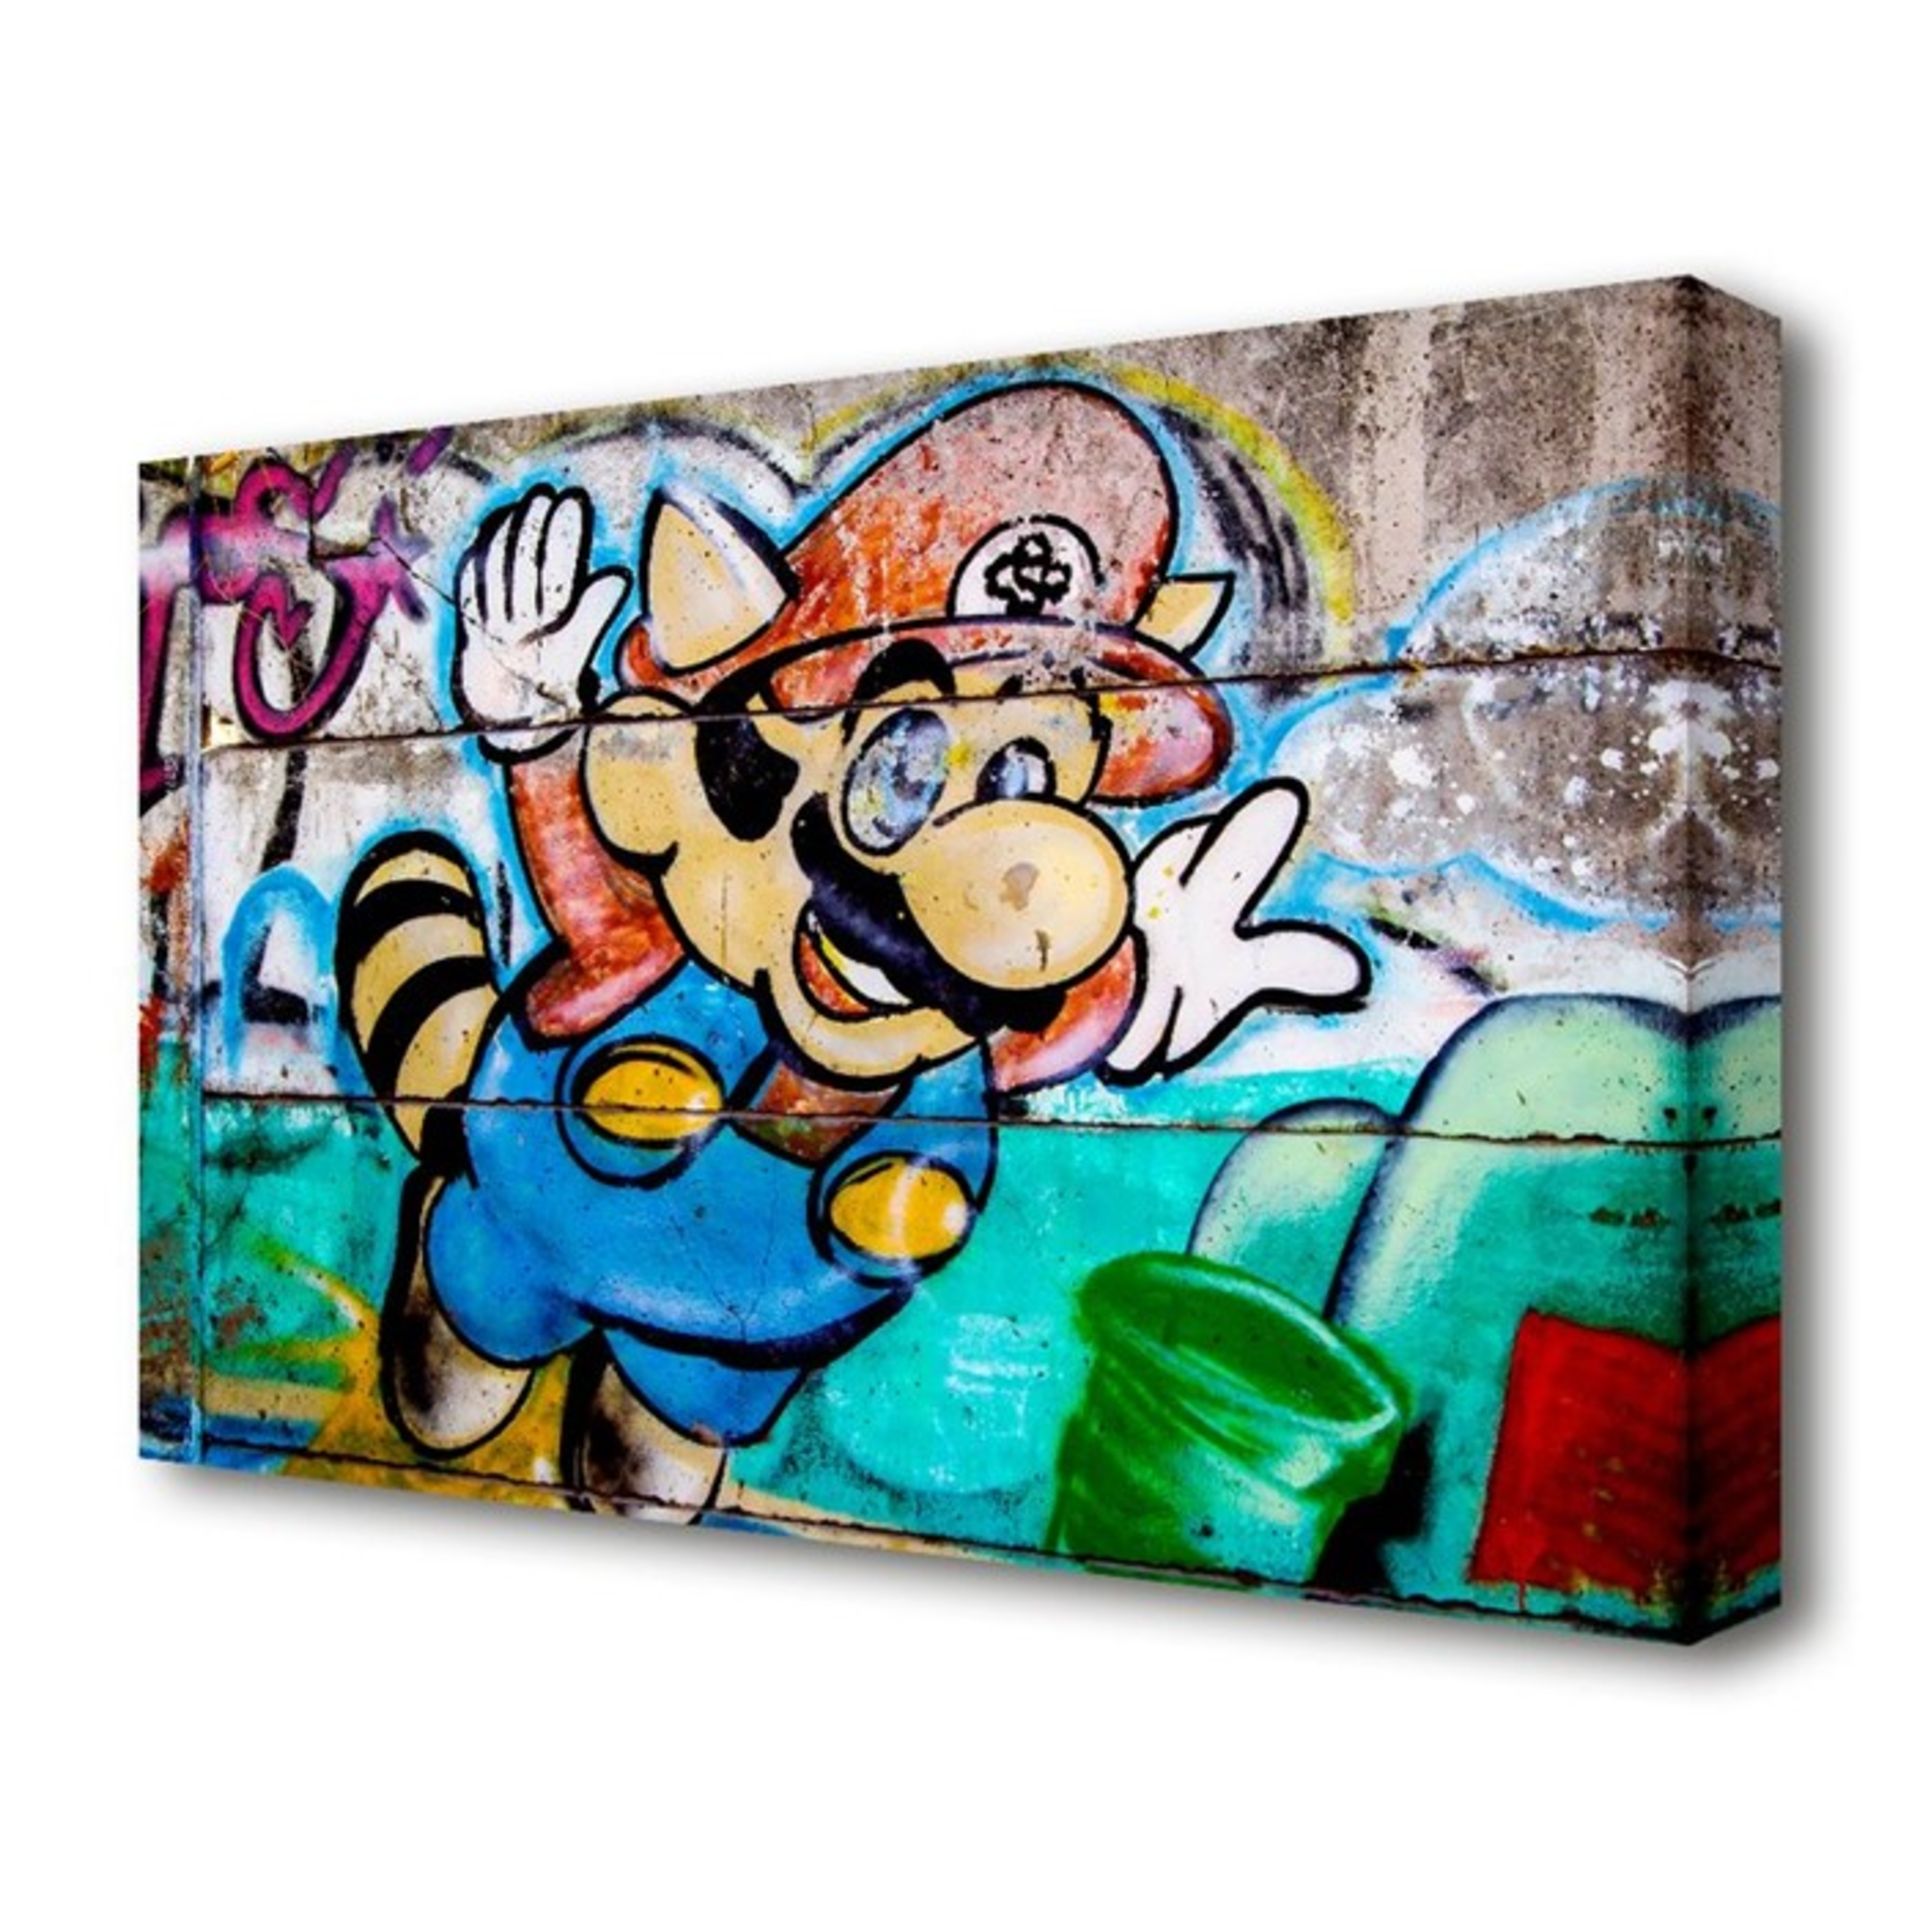 East Urban Home, 'Mario Fly Urban' Painting Print on Canvas - RRP £38.99 (BGSY2254.43179305 -